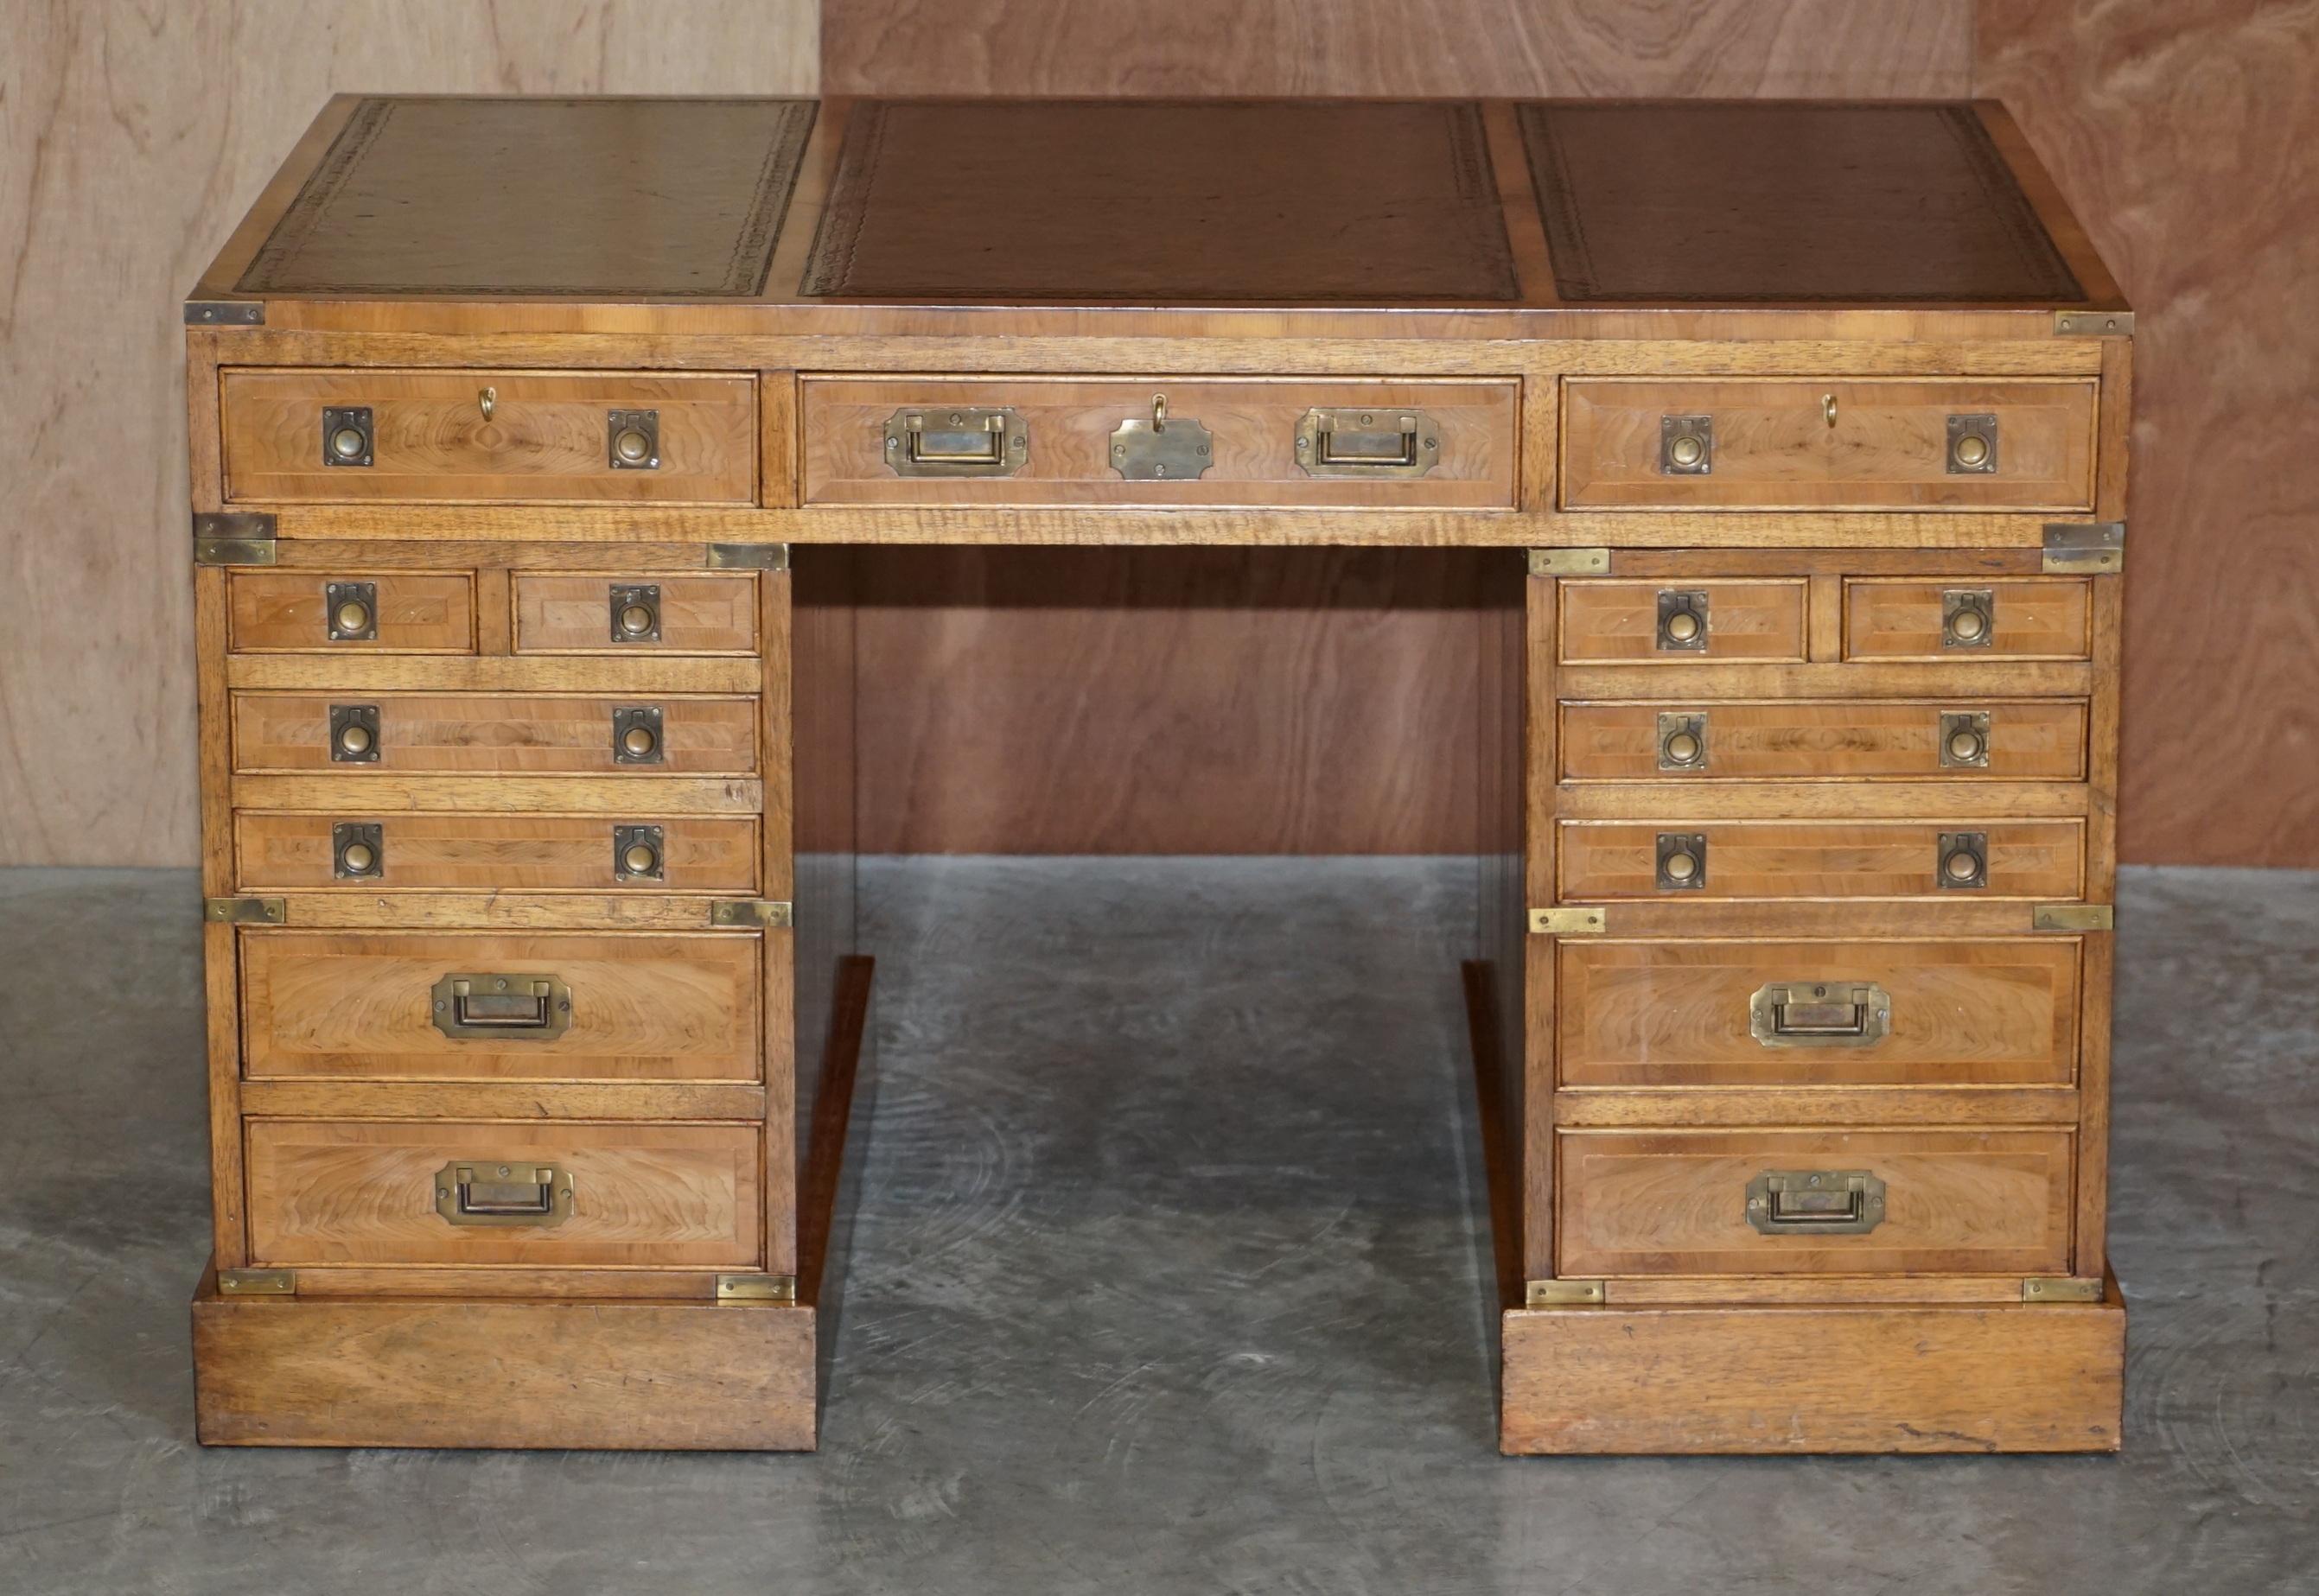 We are delighted to offer this very rare and highly collectable, double sided, original Military Campaign partner desk in Burr Elm with hand dyed leather top

Please note the delivery fee listed is just a guide, it covers within the M25 only for